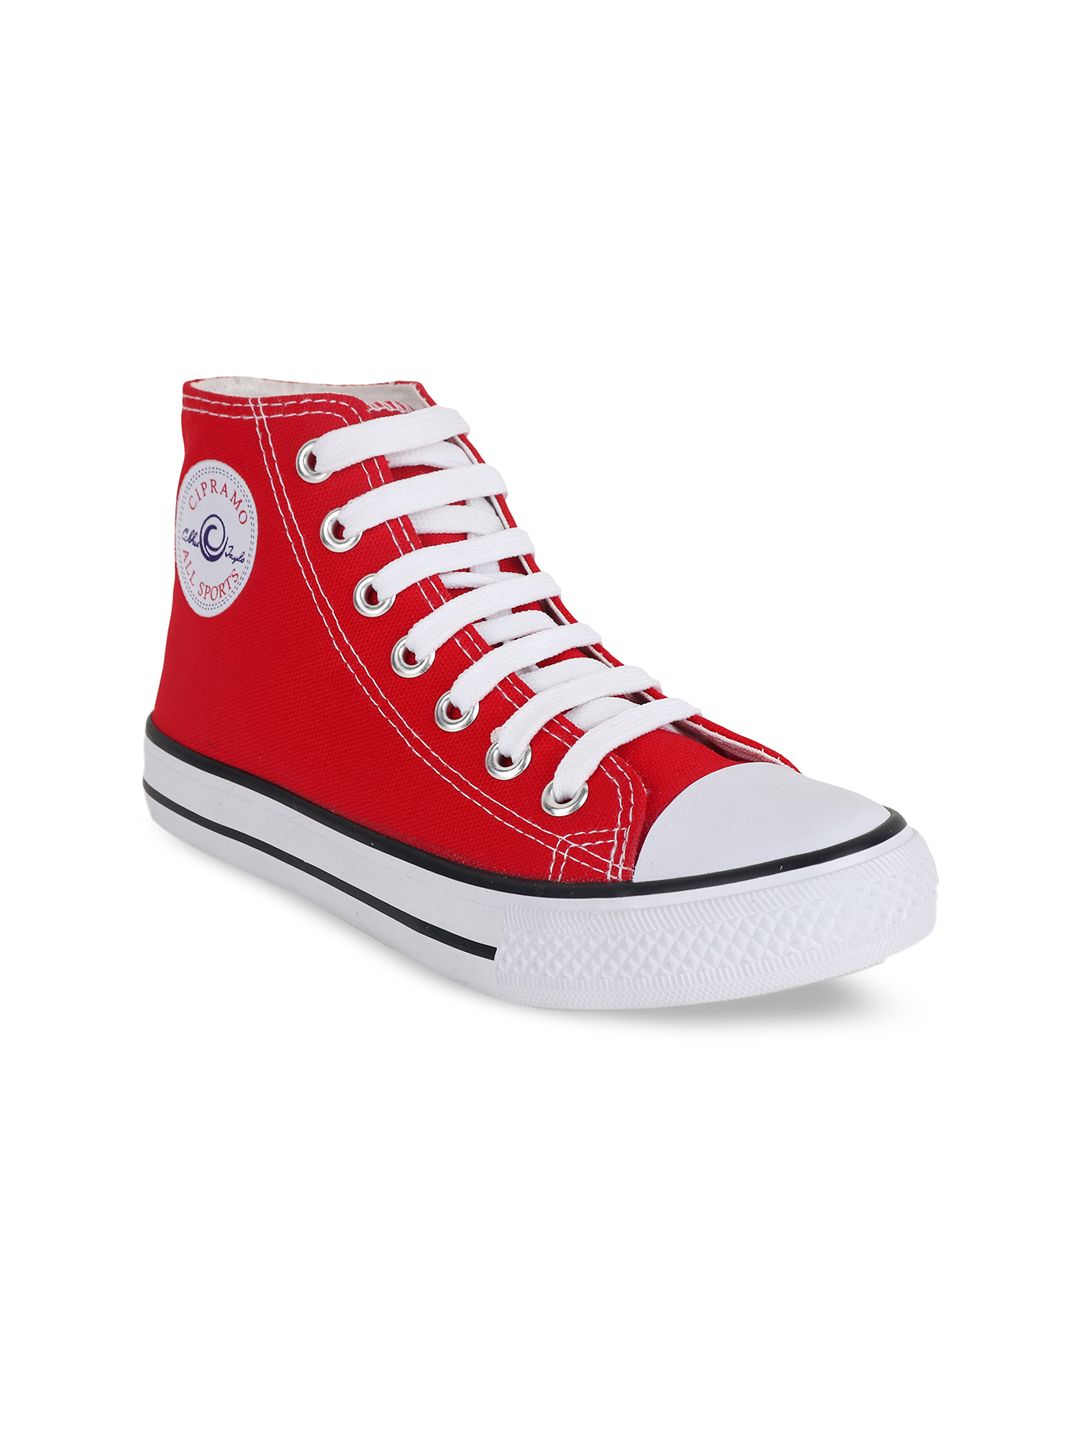 MOZAFIA Women Red High-Top Sneakers Price in India